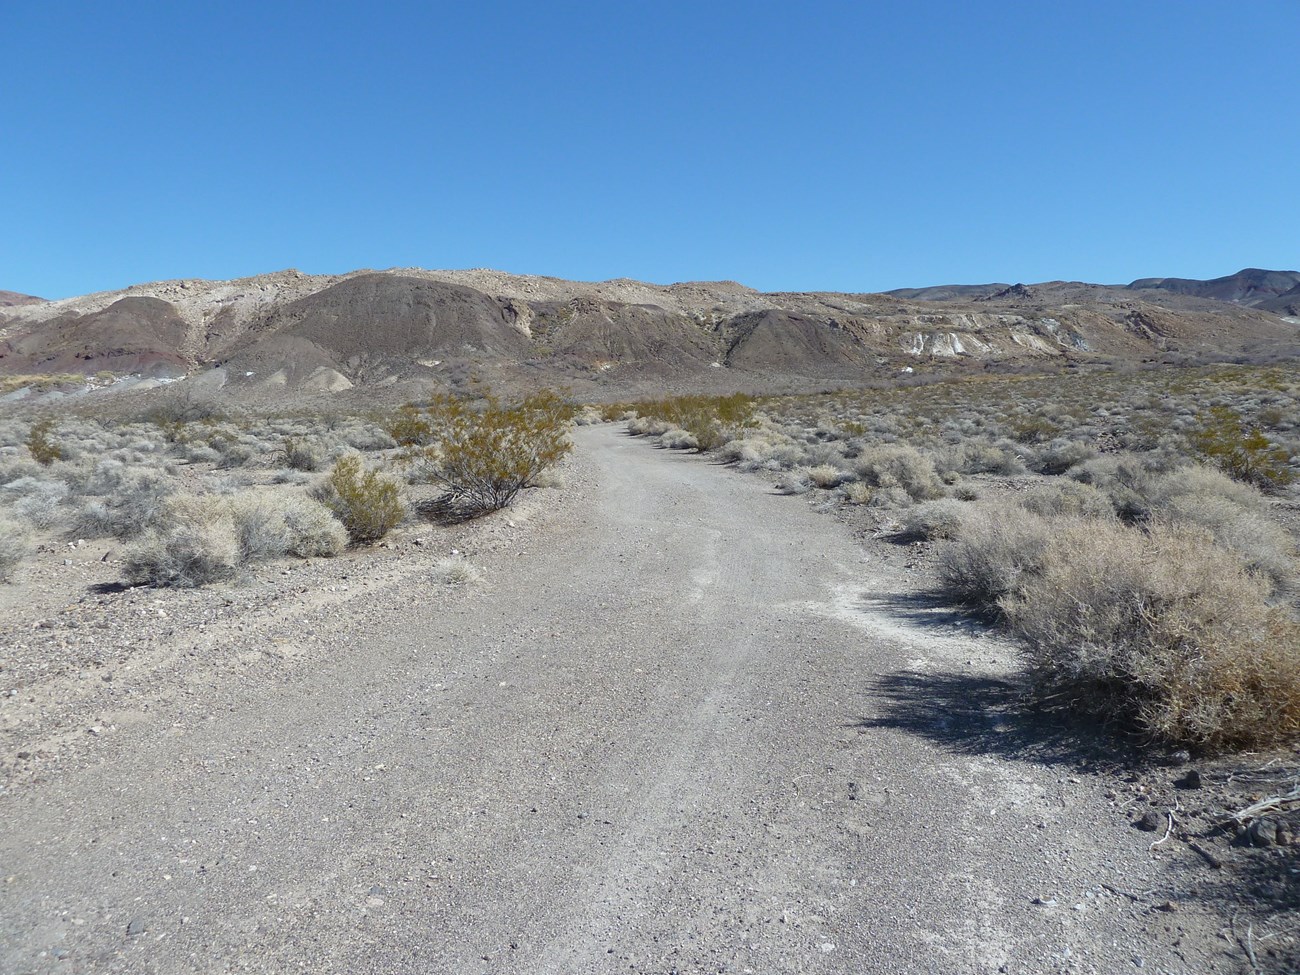 A ranch entrance road is a narrow, curvilinear road surfaced with dirt and leading through low scrubby vegetation.